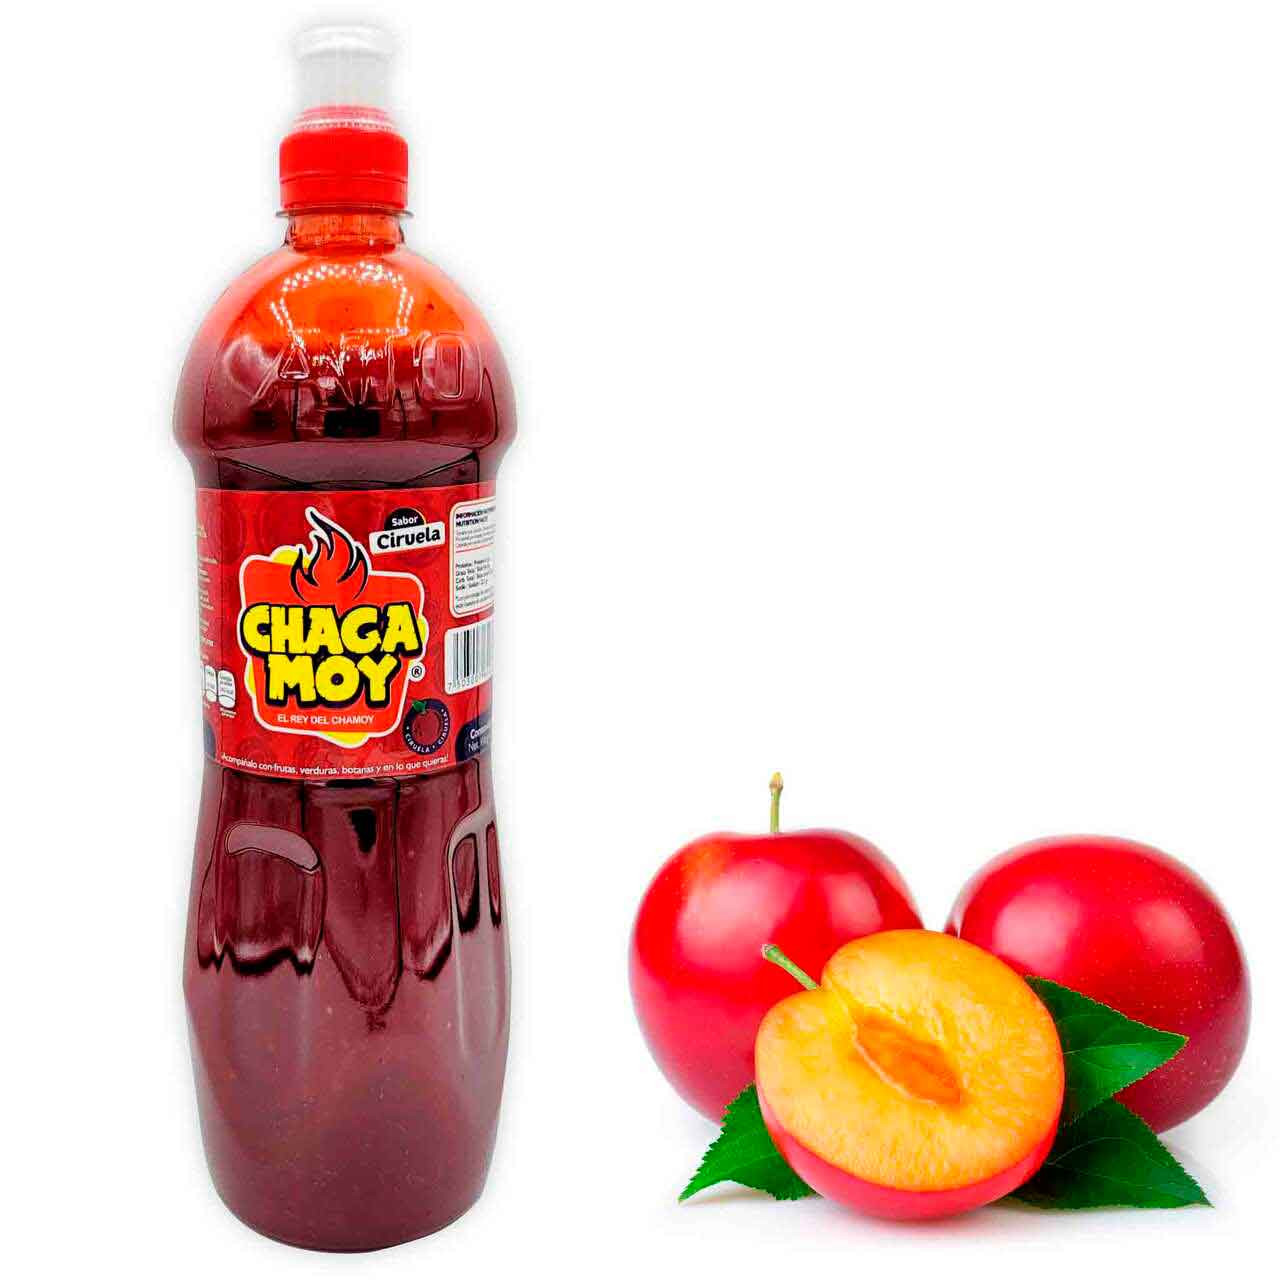 This is a delicious and spicy sauce with a tasty plum pulp flavor and subtle touches of spicy essence. The bottle has space for one liter of this spicy and fruity sauce that you can put on top of fruits, vegetables, snacks, chips and even drinks. 